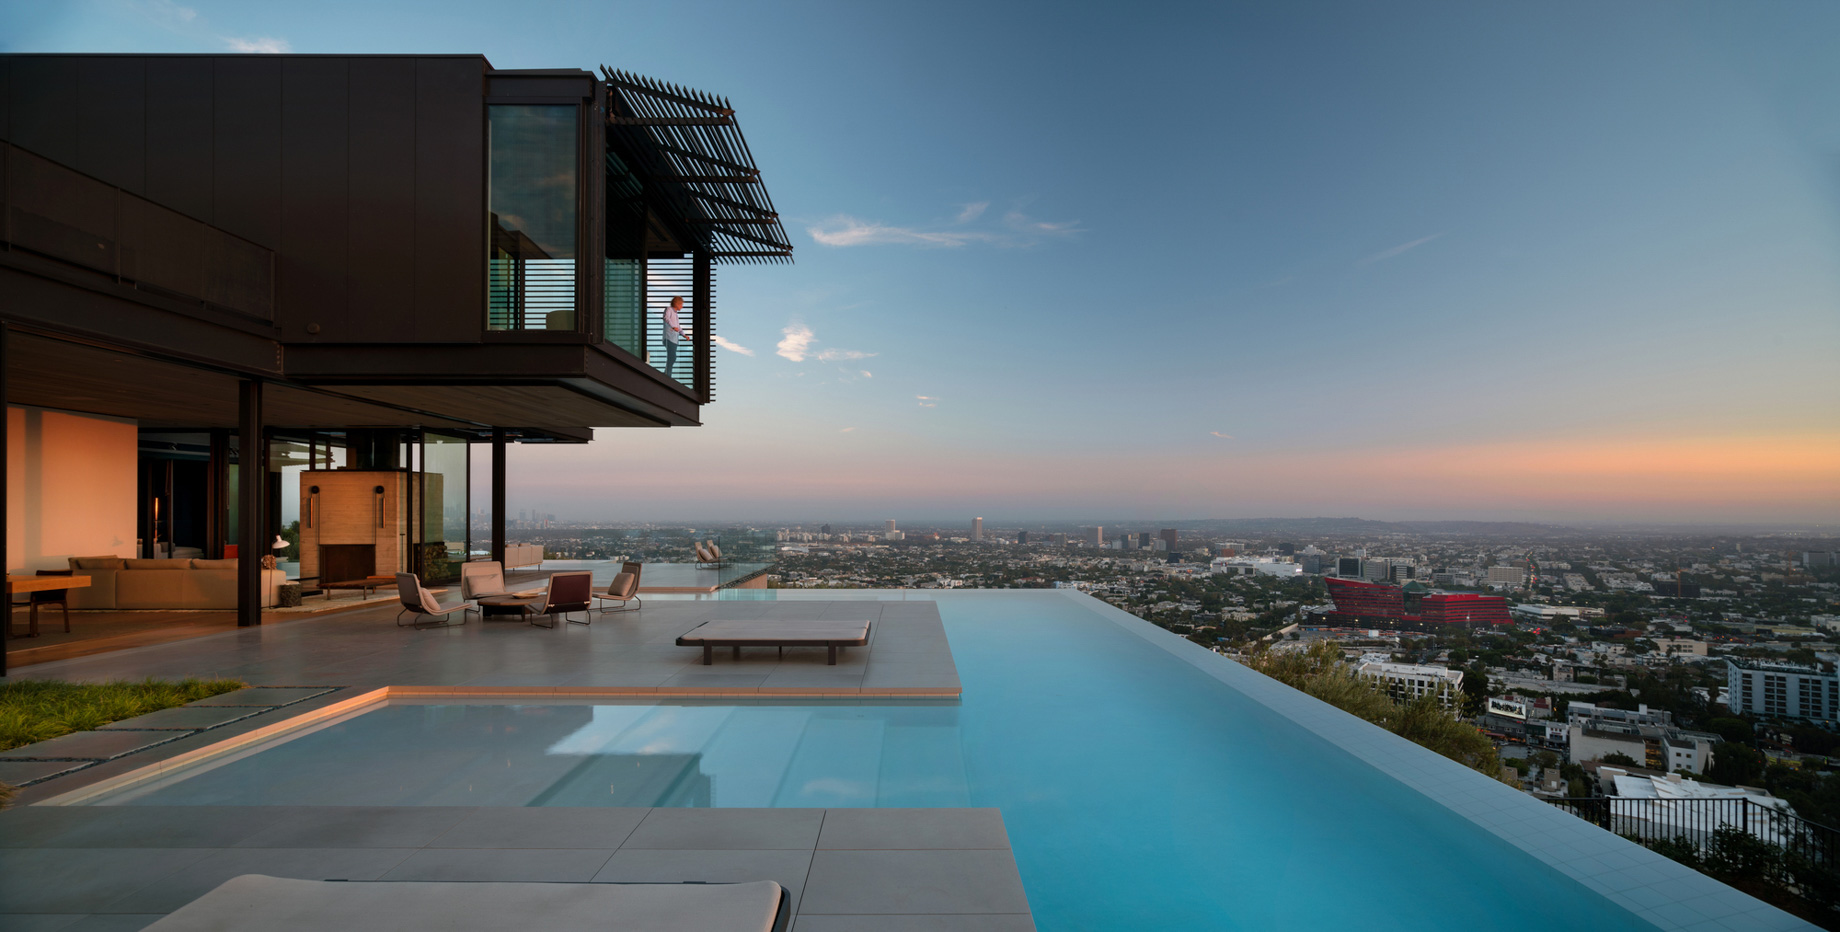 Collywood House - 1301 Collingwood Pl, Los Angeles, CA, USA - West Hollywood Modern Contemporary Home